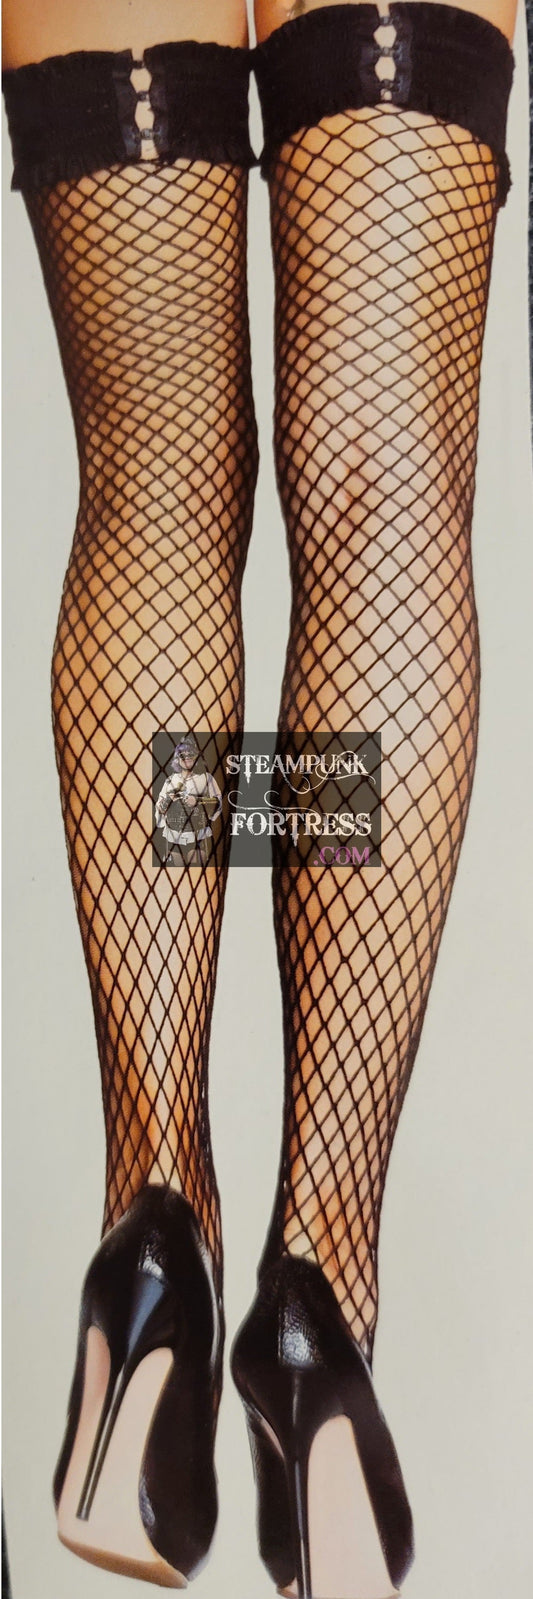 BLACK FISHNET THIGH HIGHS HOOK AND EYE CLOSURE 80S COSPLAY COSTUME HALLOWEEN- MASS PRODUCED DUPLICATE